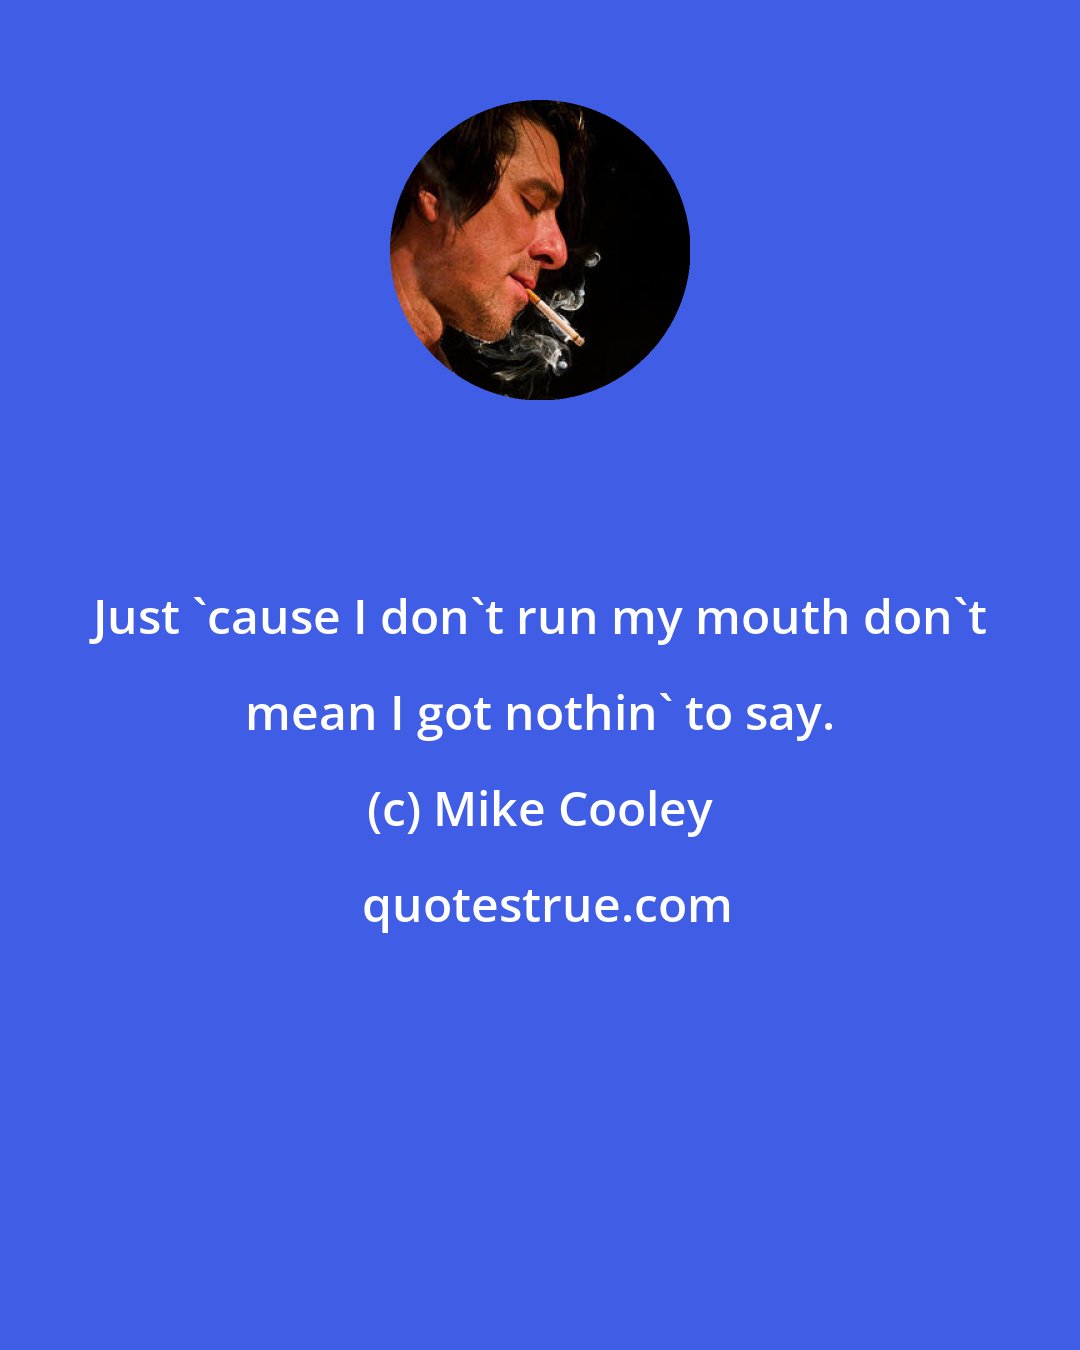 Mike Cooley: Just 'cause I don't run my mouth don't mean I got nothin' to say.